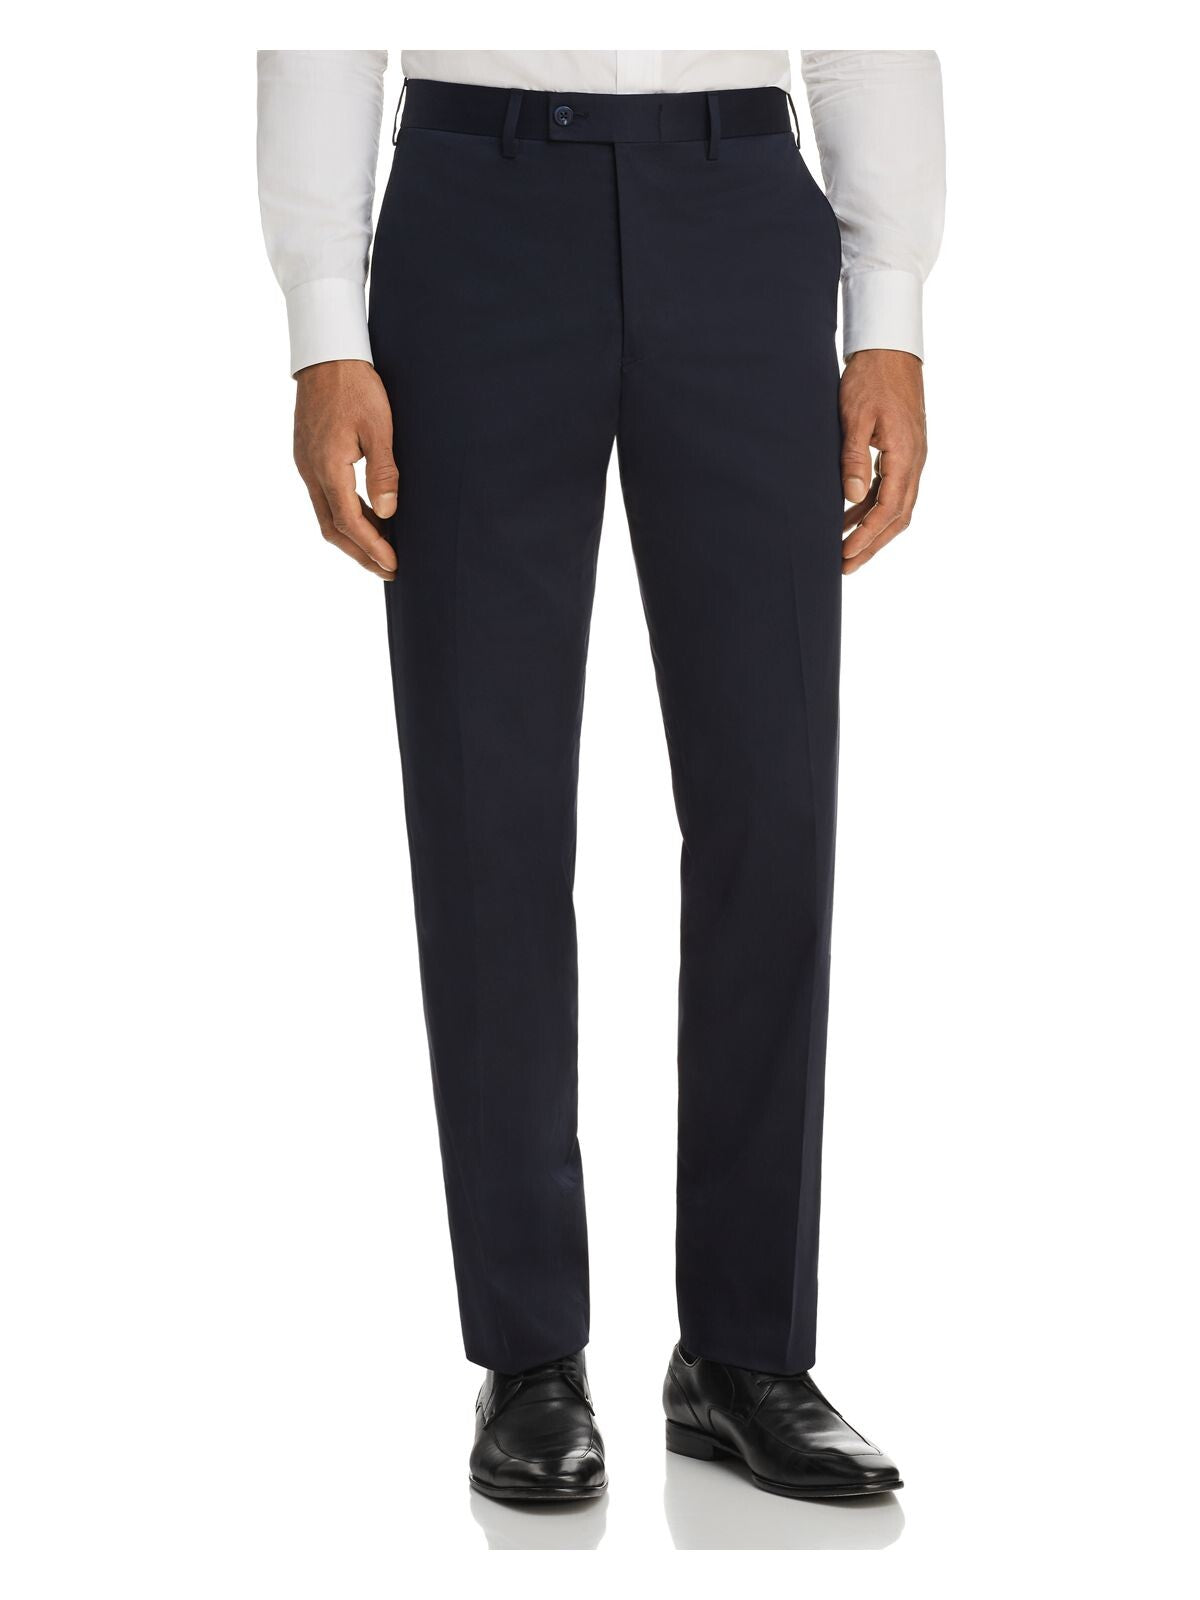 The Mens store Mens Navy Straight Leg, Stretch, Classic Fit Cotton Blend Pants 32R